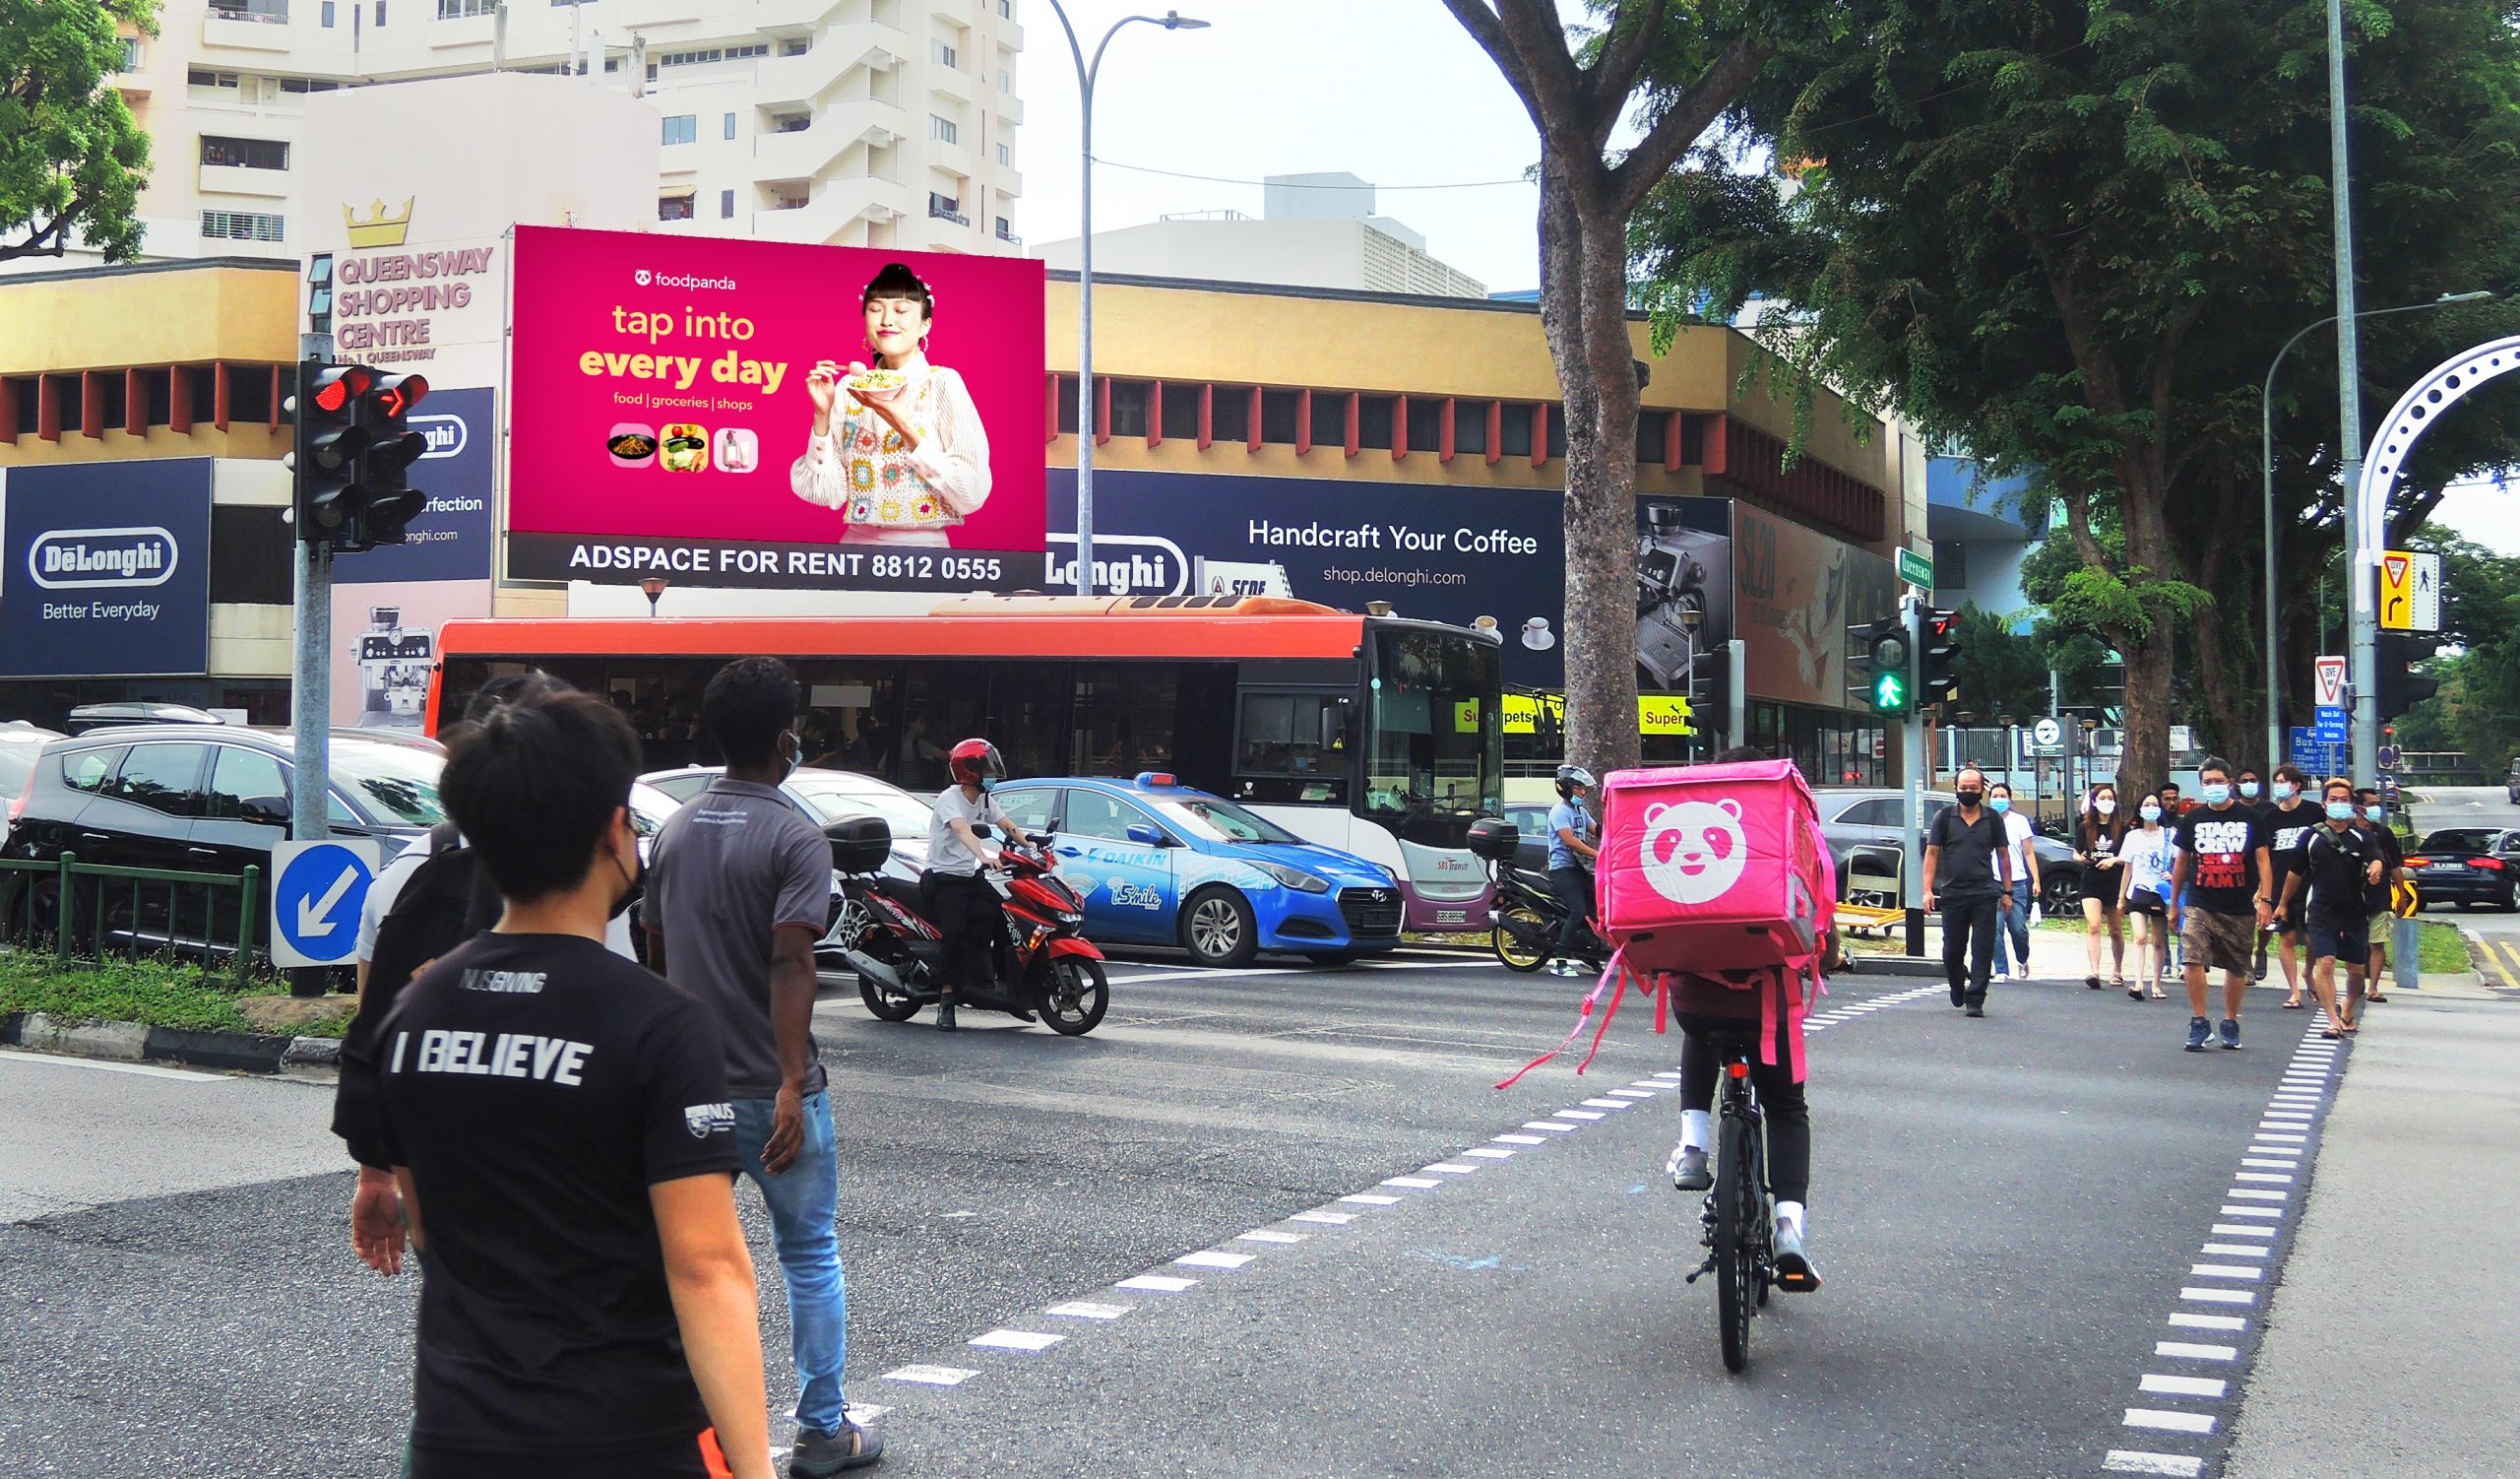 Foodpanda Boost Their Reach to Millions Using Largest Network of Outdoor Digital Screens